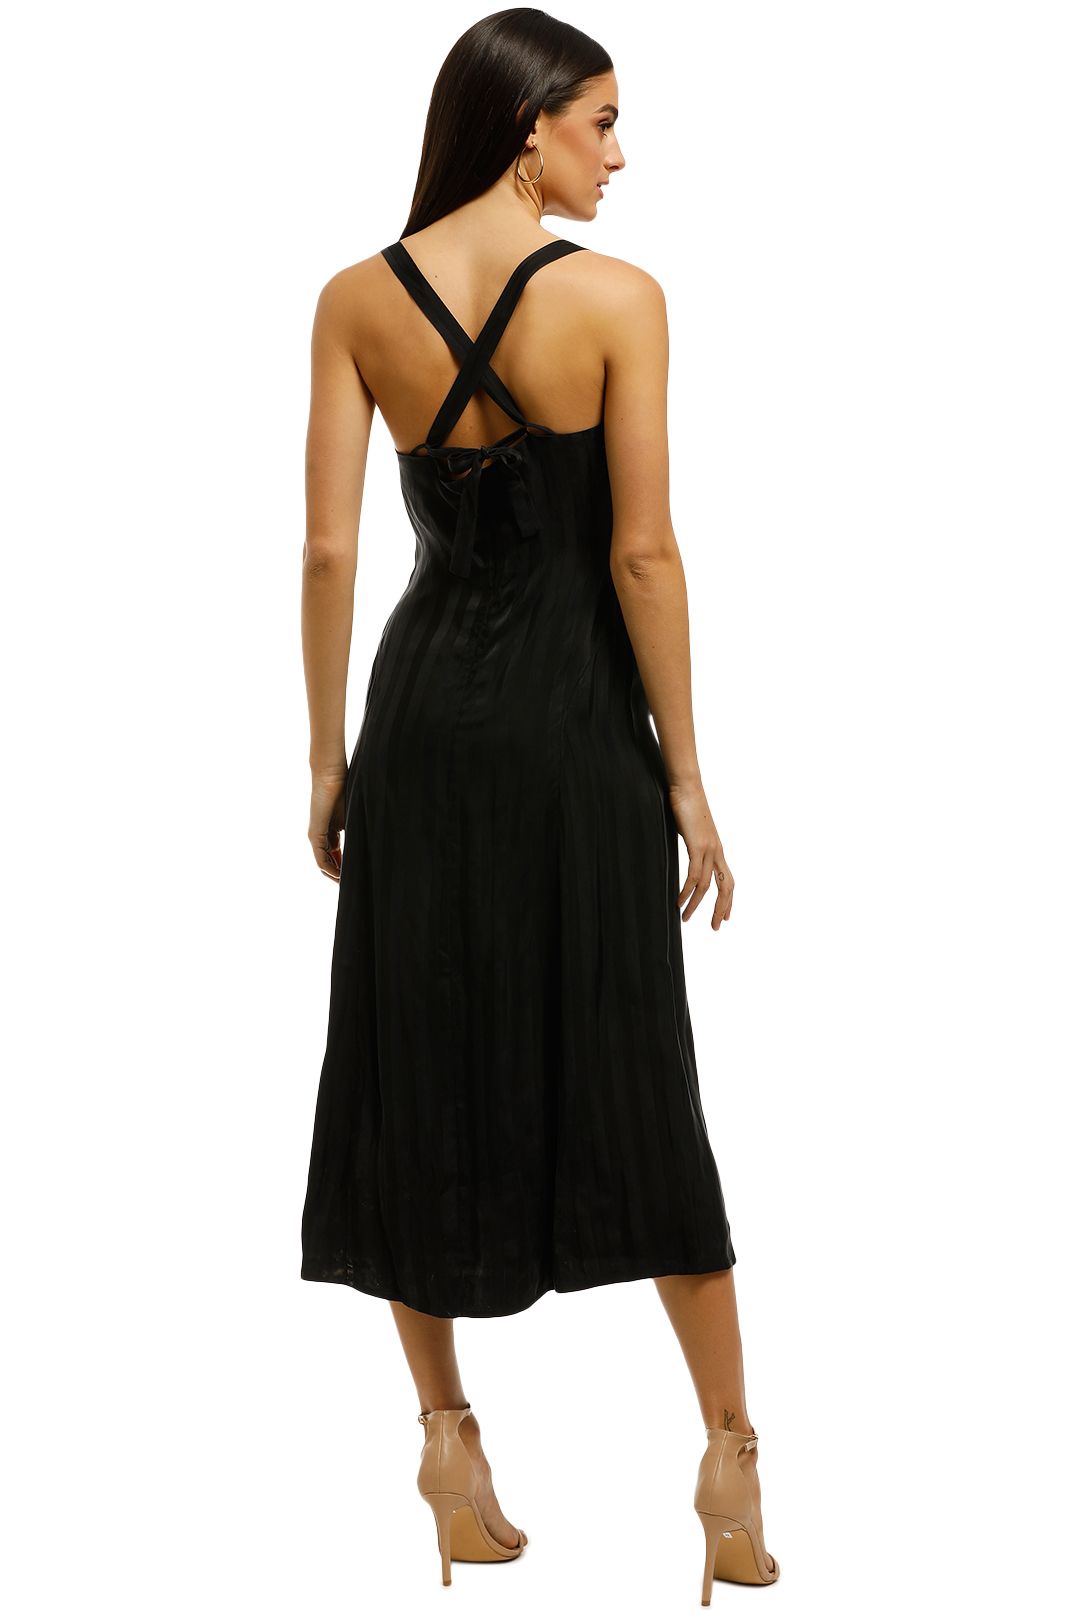 Third-Form-Looped-In-Slip-Dress-Back